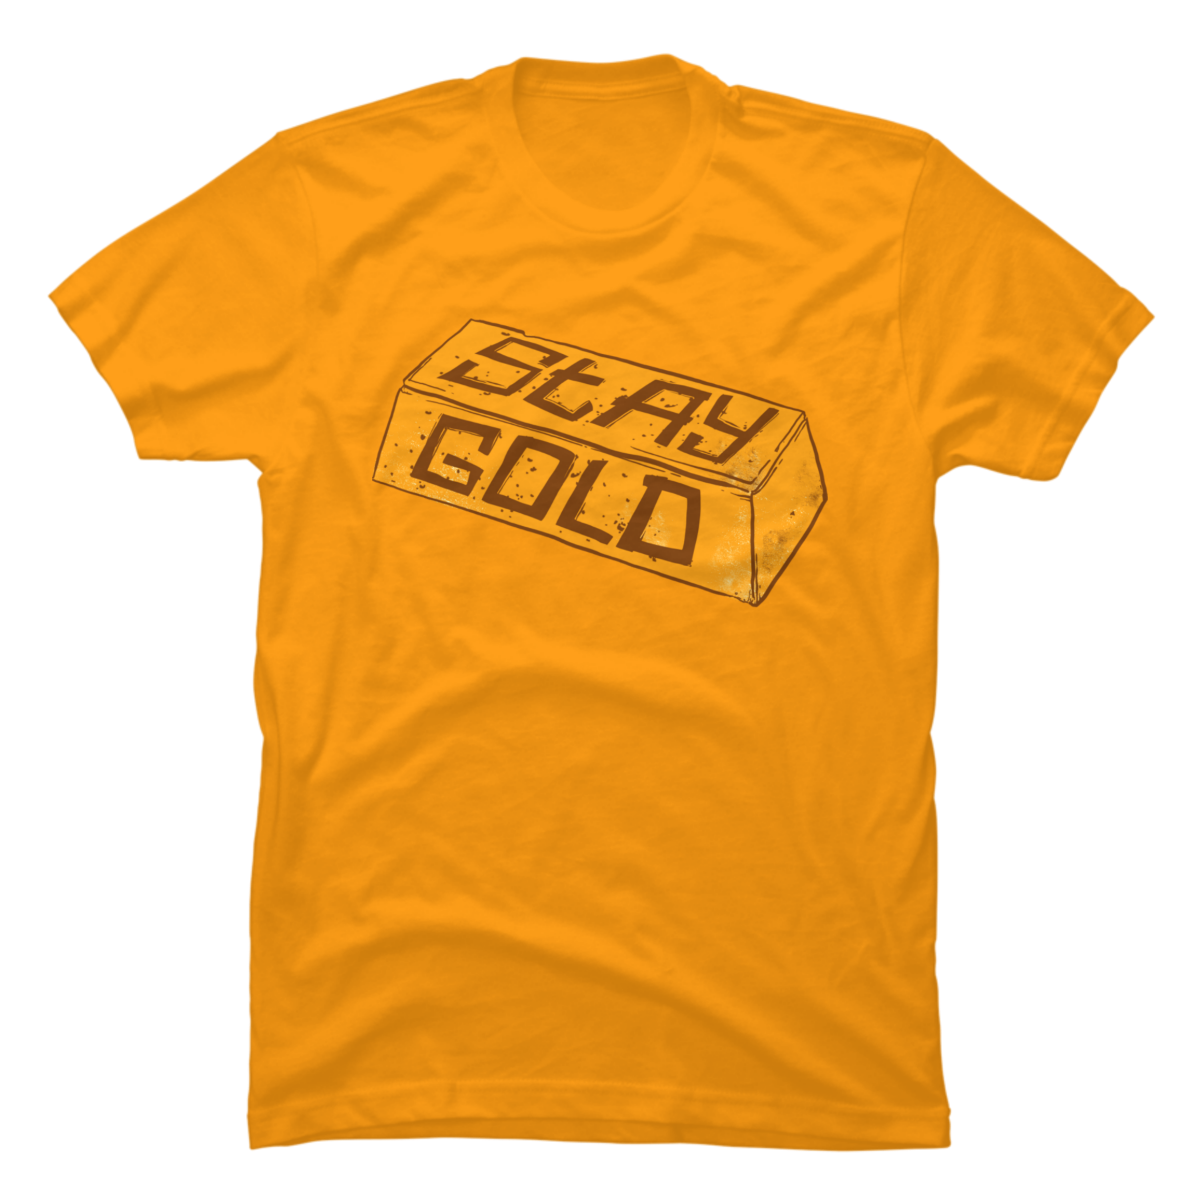 stay gold shirt